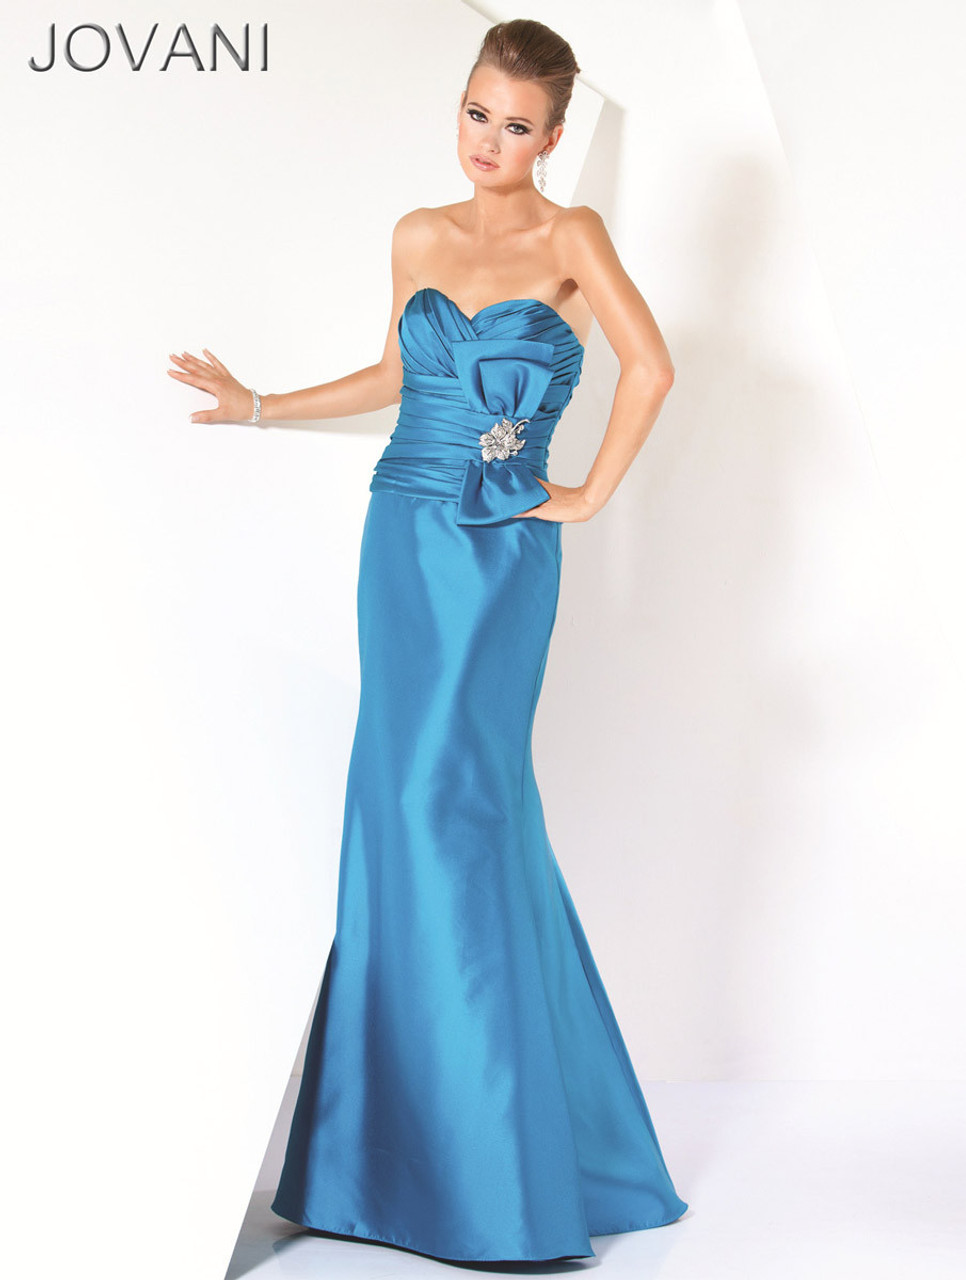 Jovani 567 Sweetheart Neckline Ruched Bodice Mermaid Gown